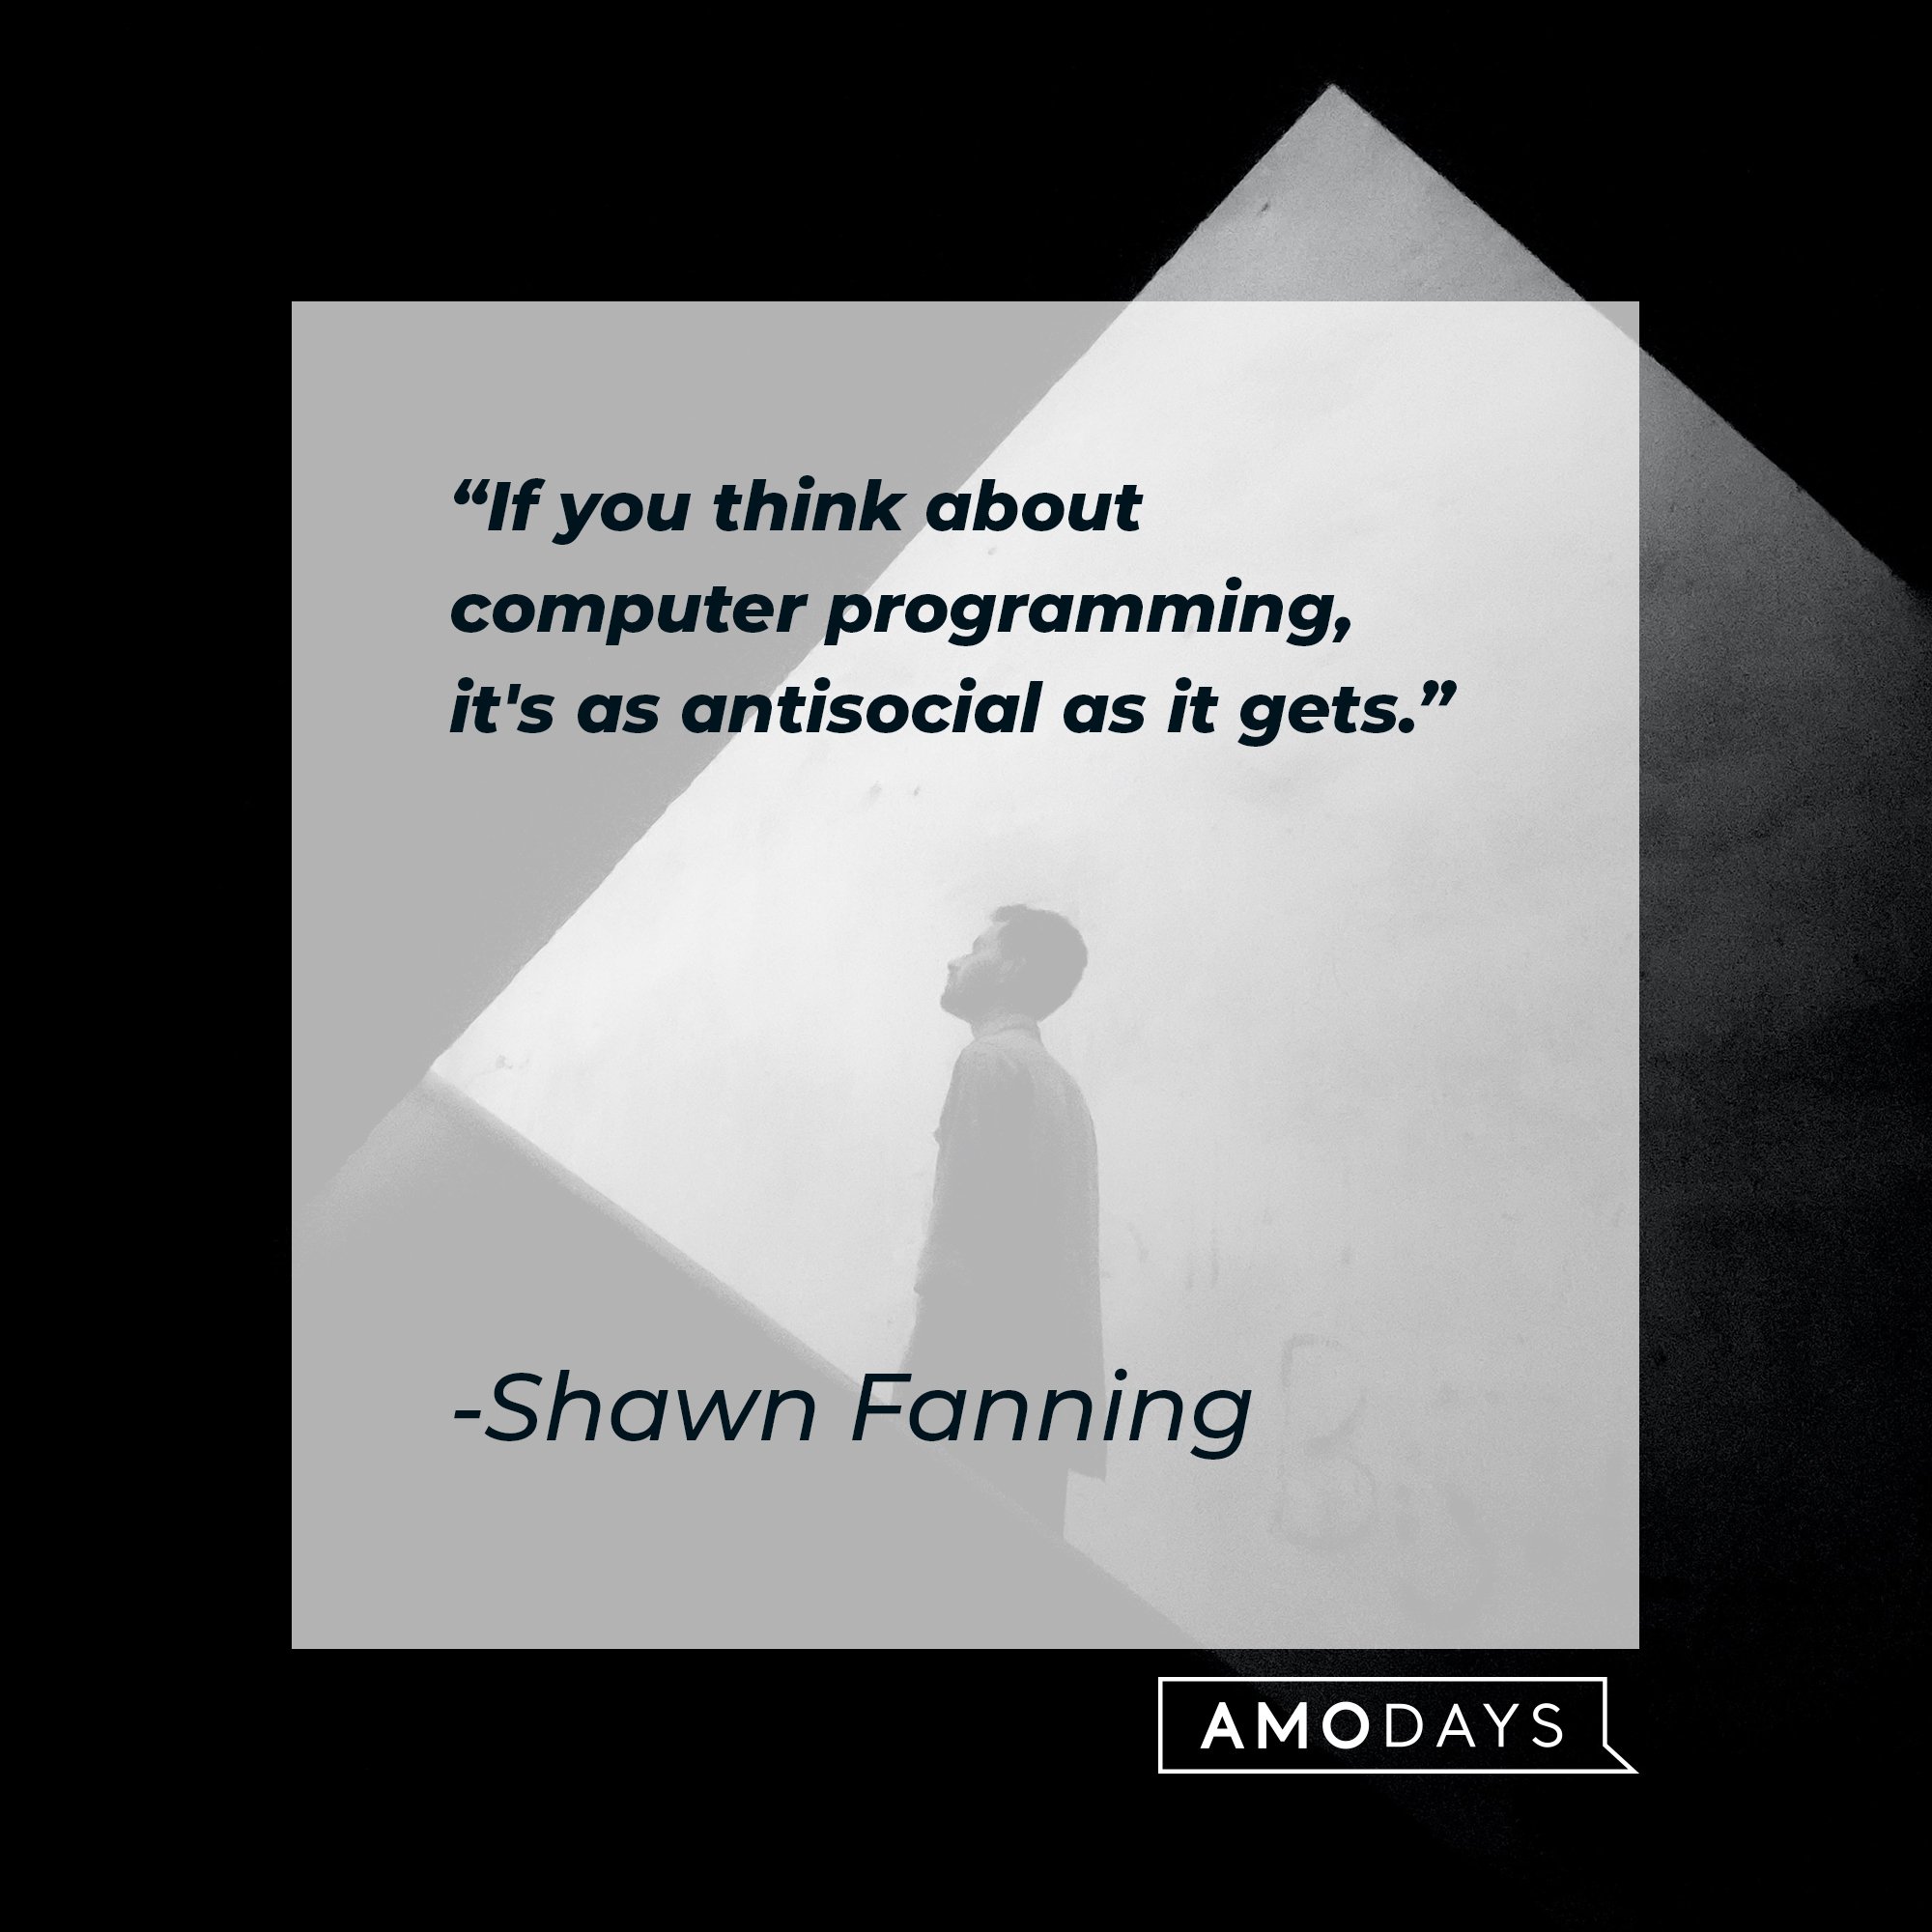  Shawn Fanning’s quote: "If you think about computer programming, it's as antisocial as it gets."  | Image: AmoDays